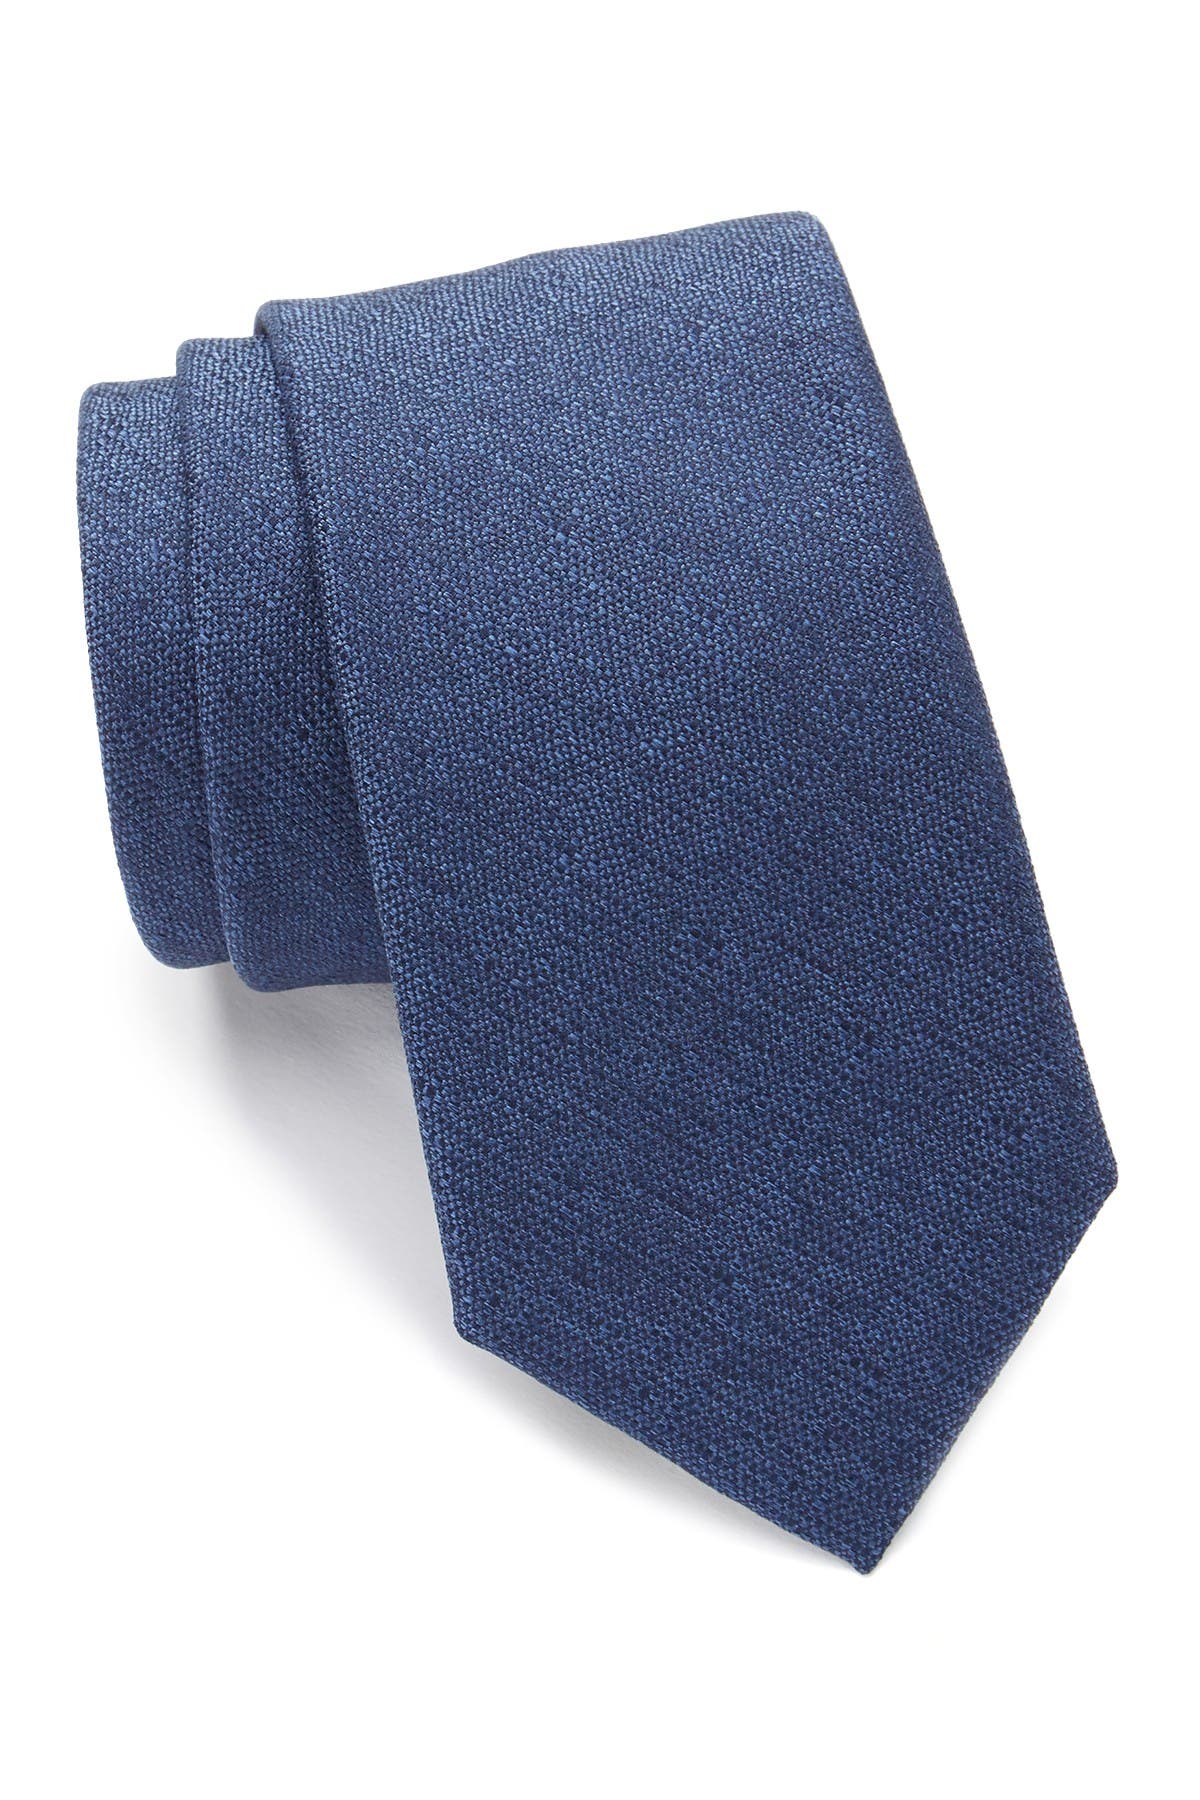 14th & Union Resink Solid Tie In Navy